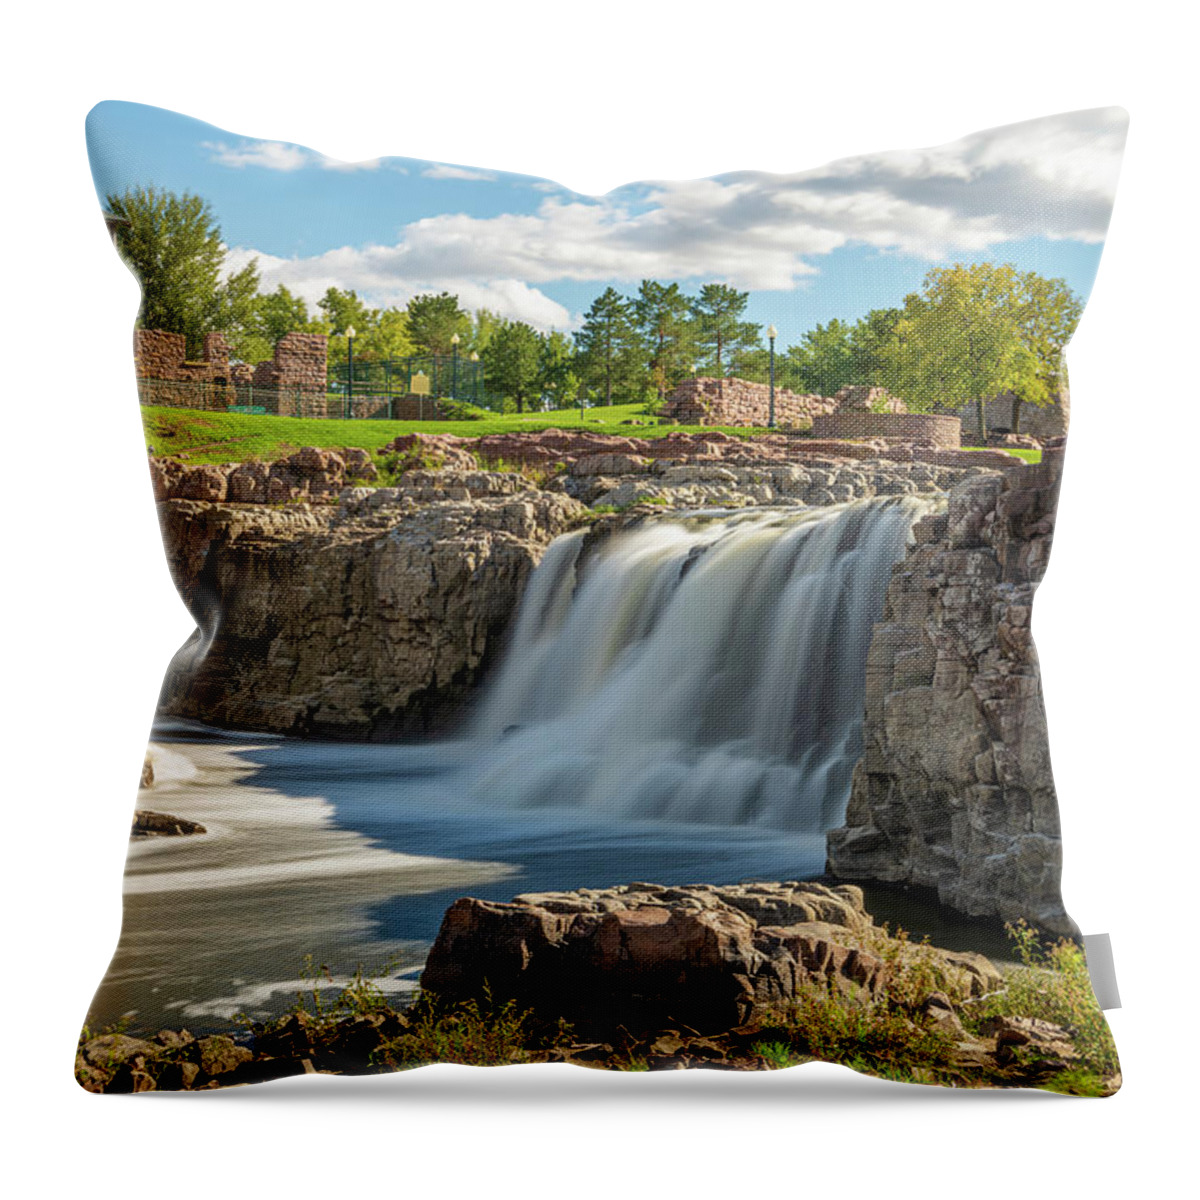 America Throw Pillow featuring the photograph Falls Park by Erin K Images